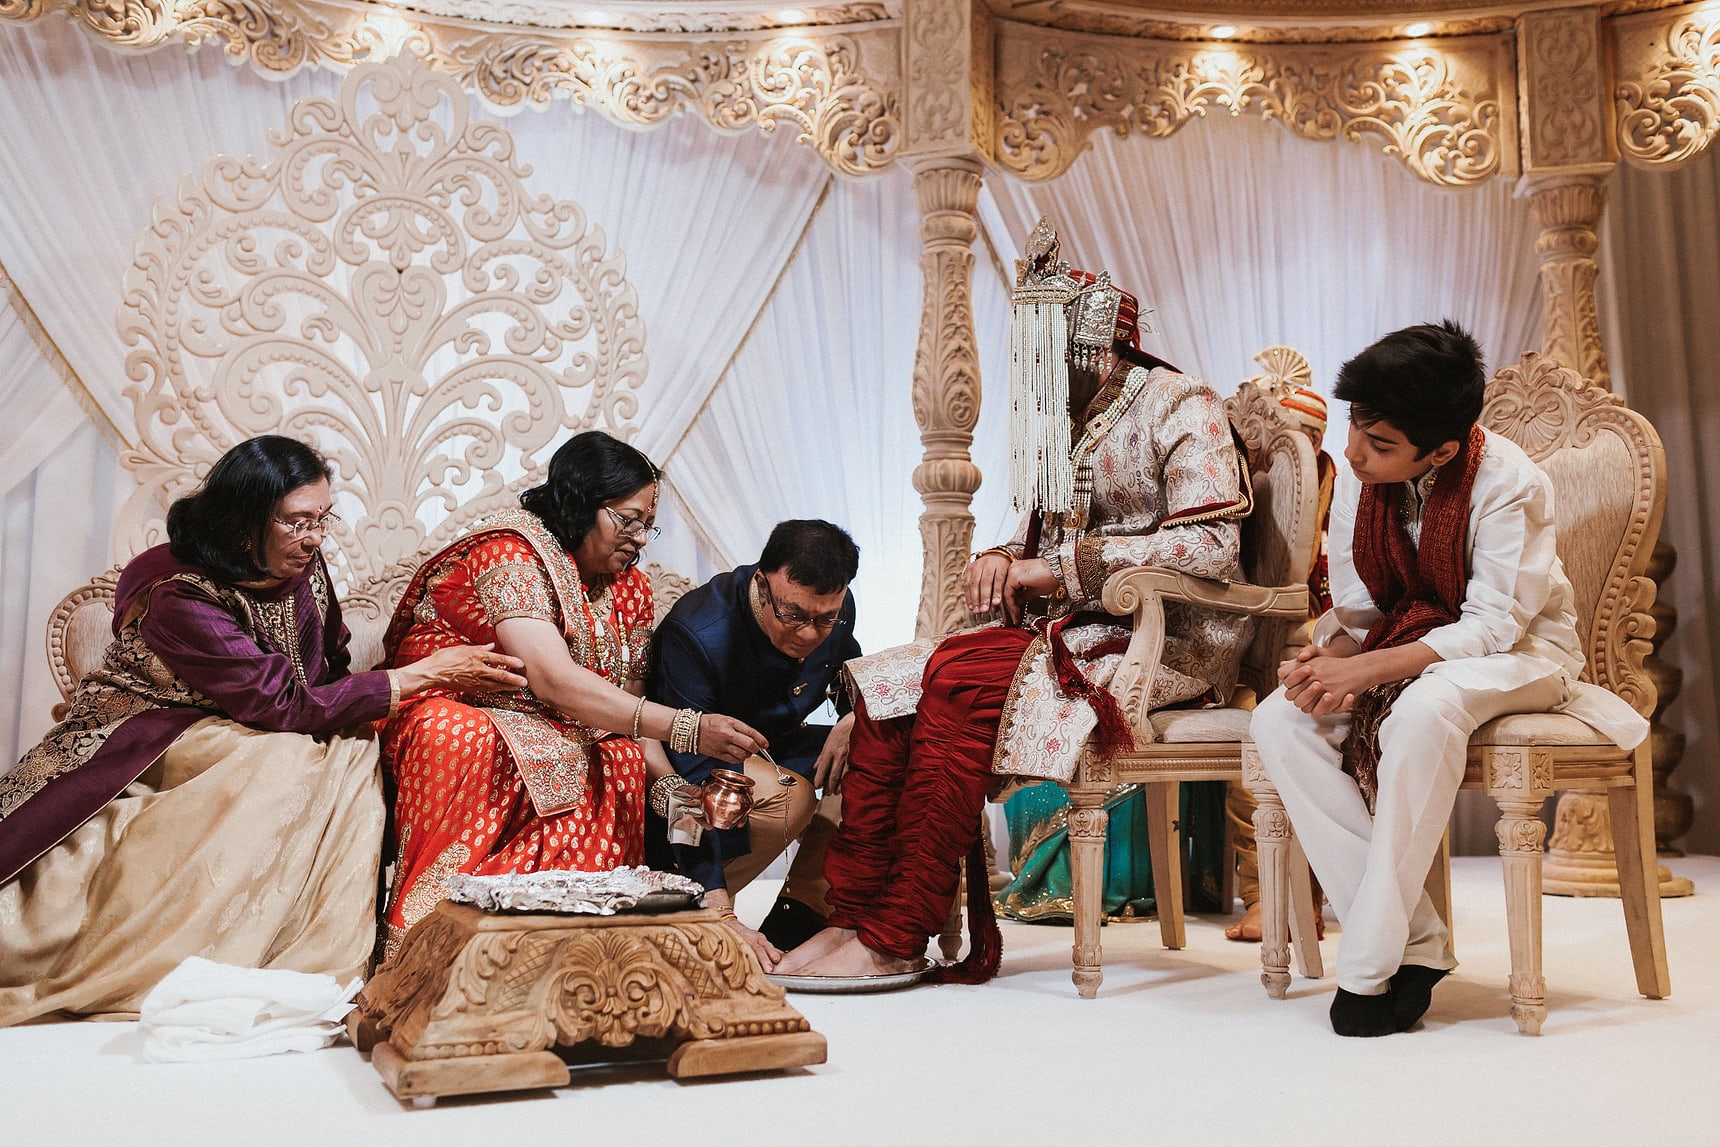 Mother and Father of the bride washing Grooms feet during a Hindu wedding ceremony